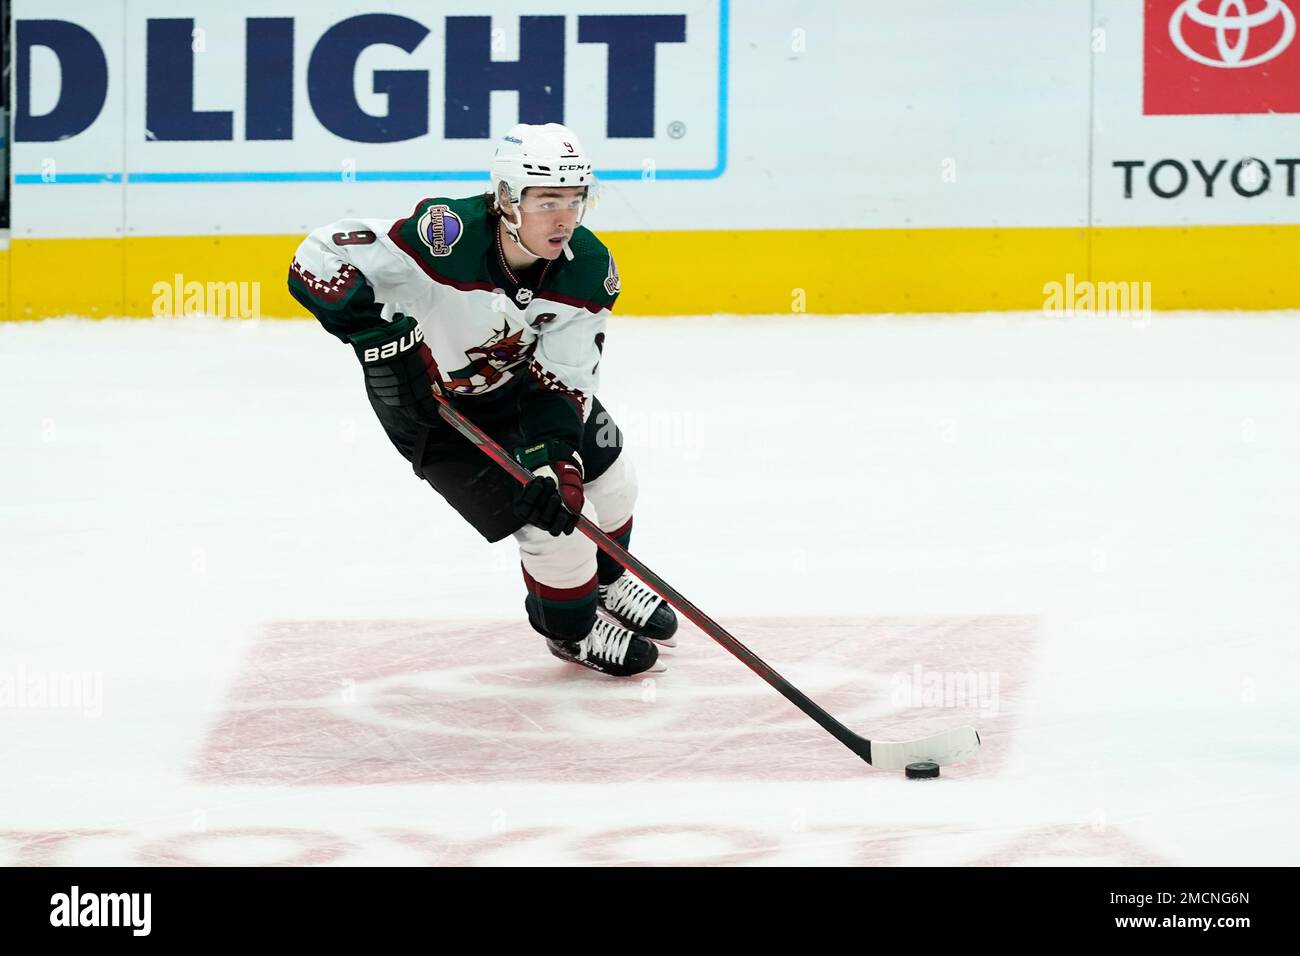 Arizona Coyotes right wing Clayton Keller skates to the puck against the  New York Rangers during the second period of an NHL hockey game Thursday,  Dec. 16, 2021, in Glendale, Ariz. The